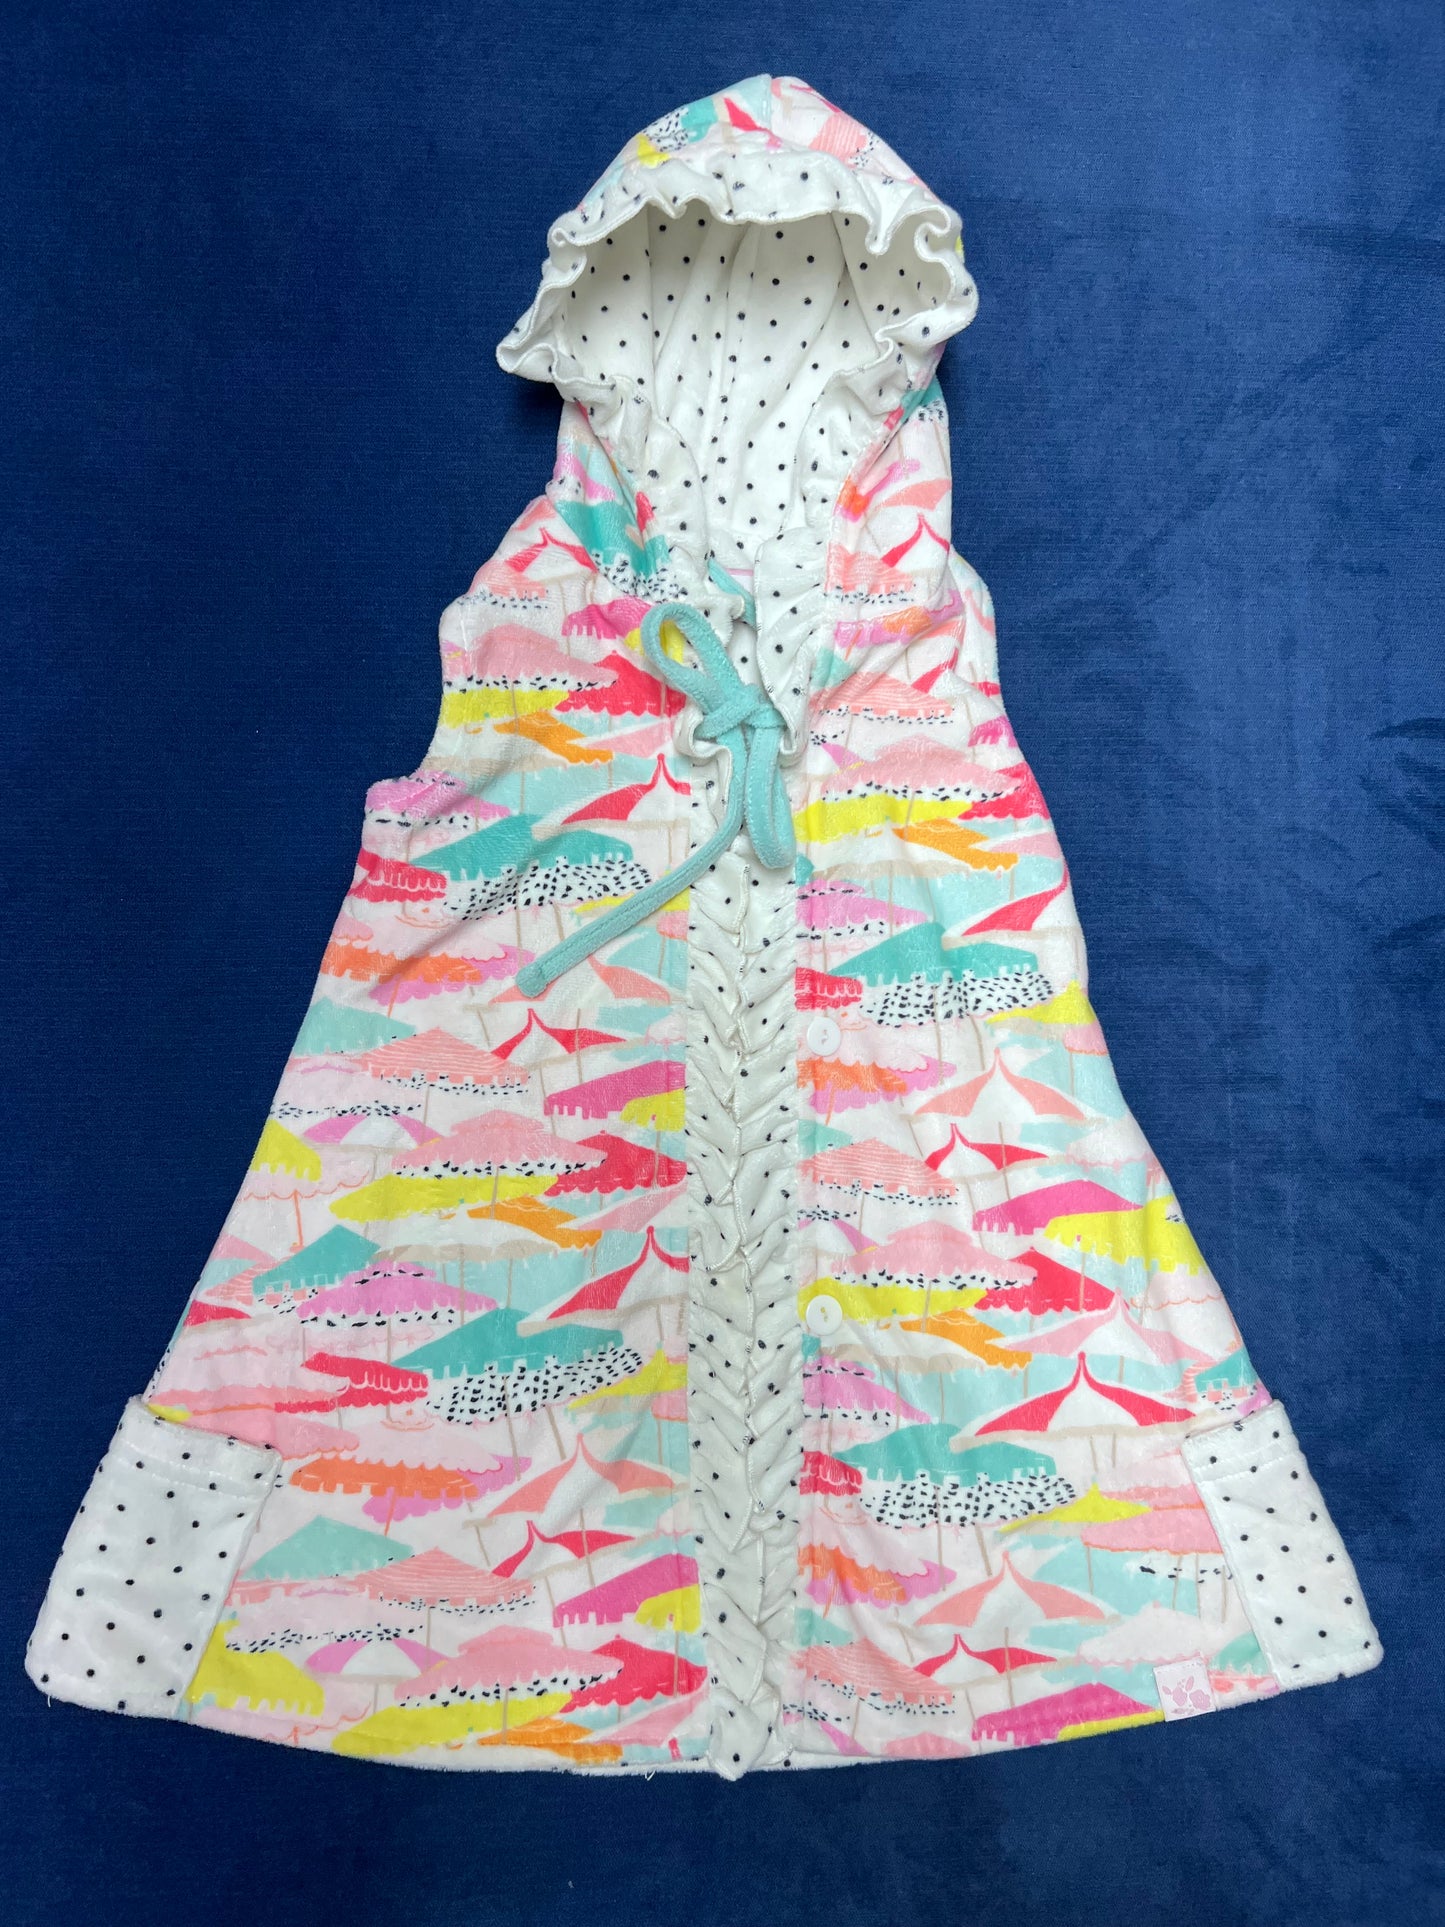 2T girls Sweethoney swim cover-up in beach umbrella pattern with polka dot lining. Super soft with hood! VGUC.